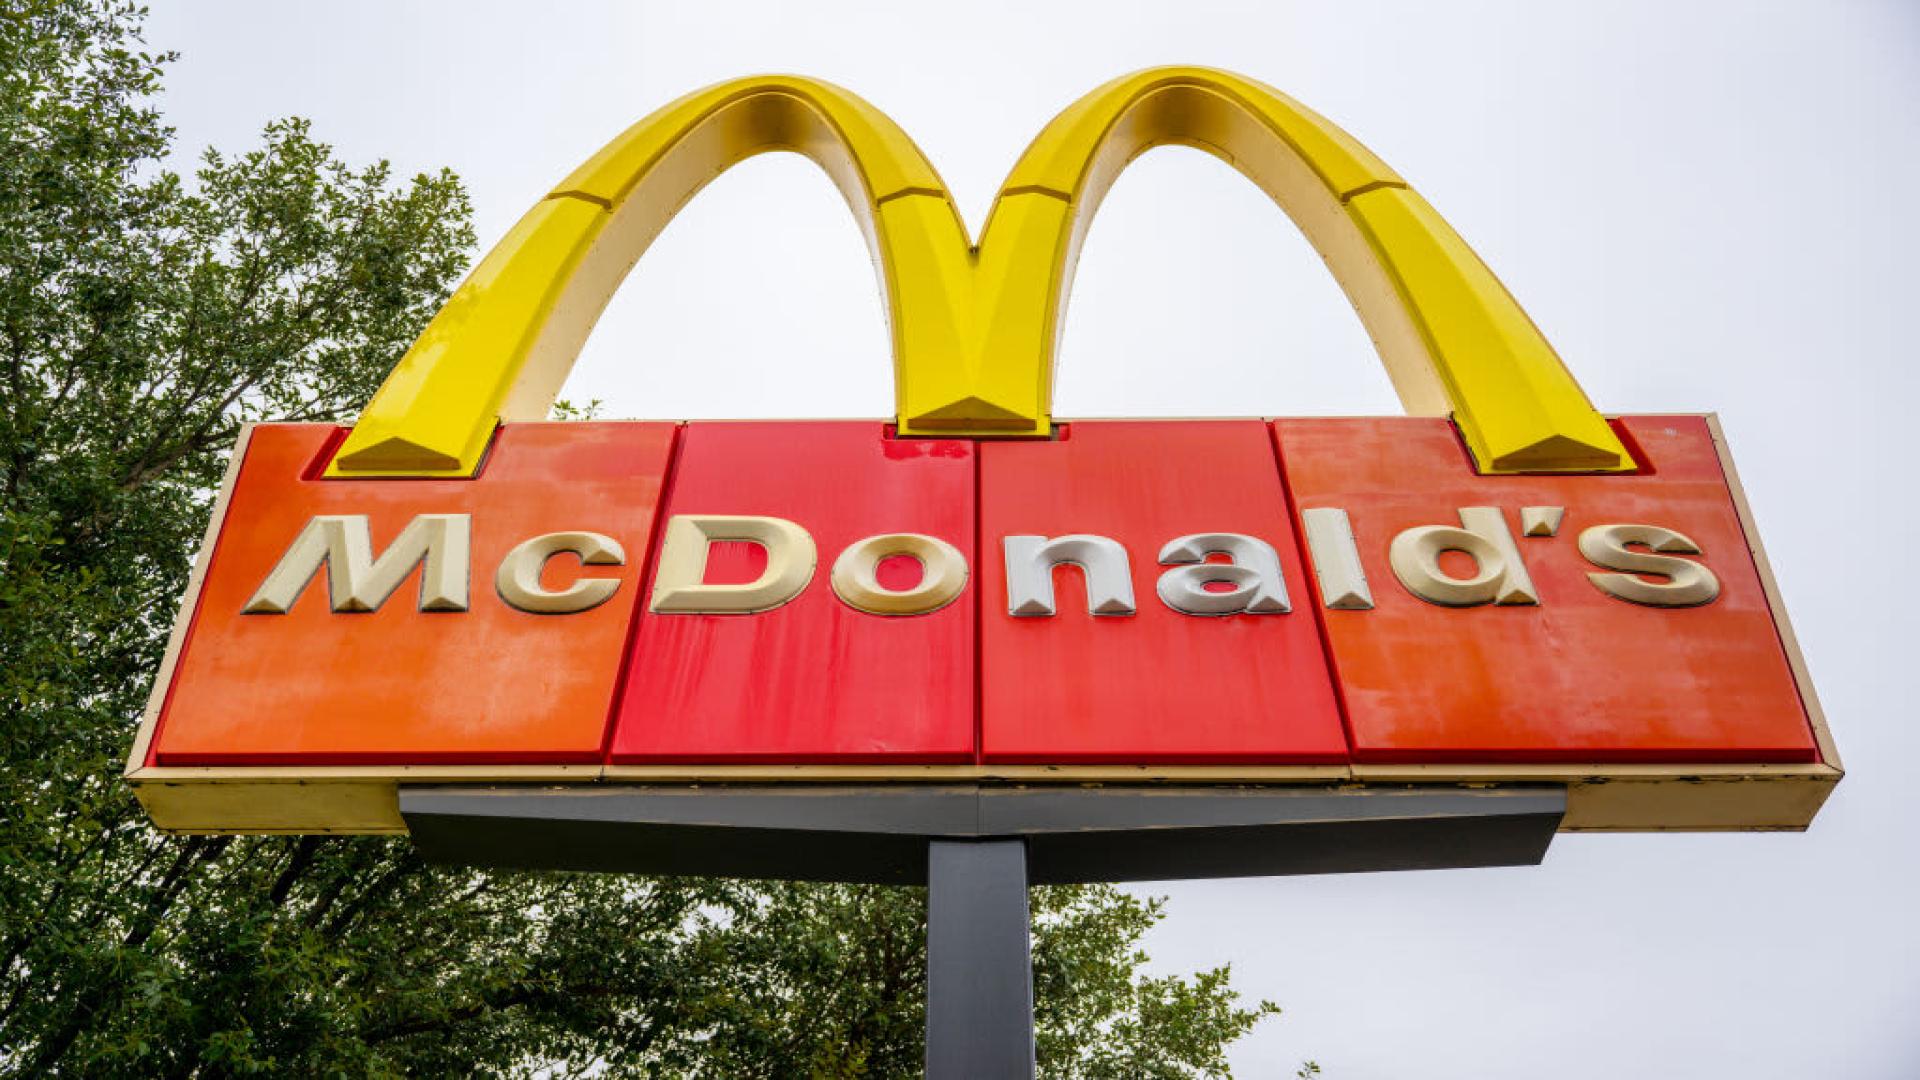 McDonald's aims to open nearly 9,000 restaurants, add 100 million loyalty members by 2027